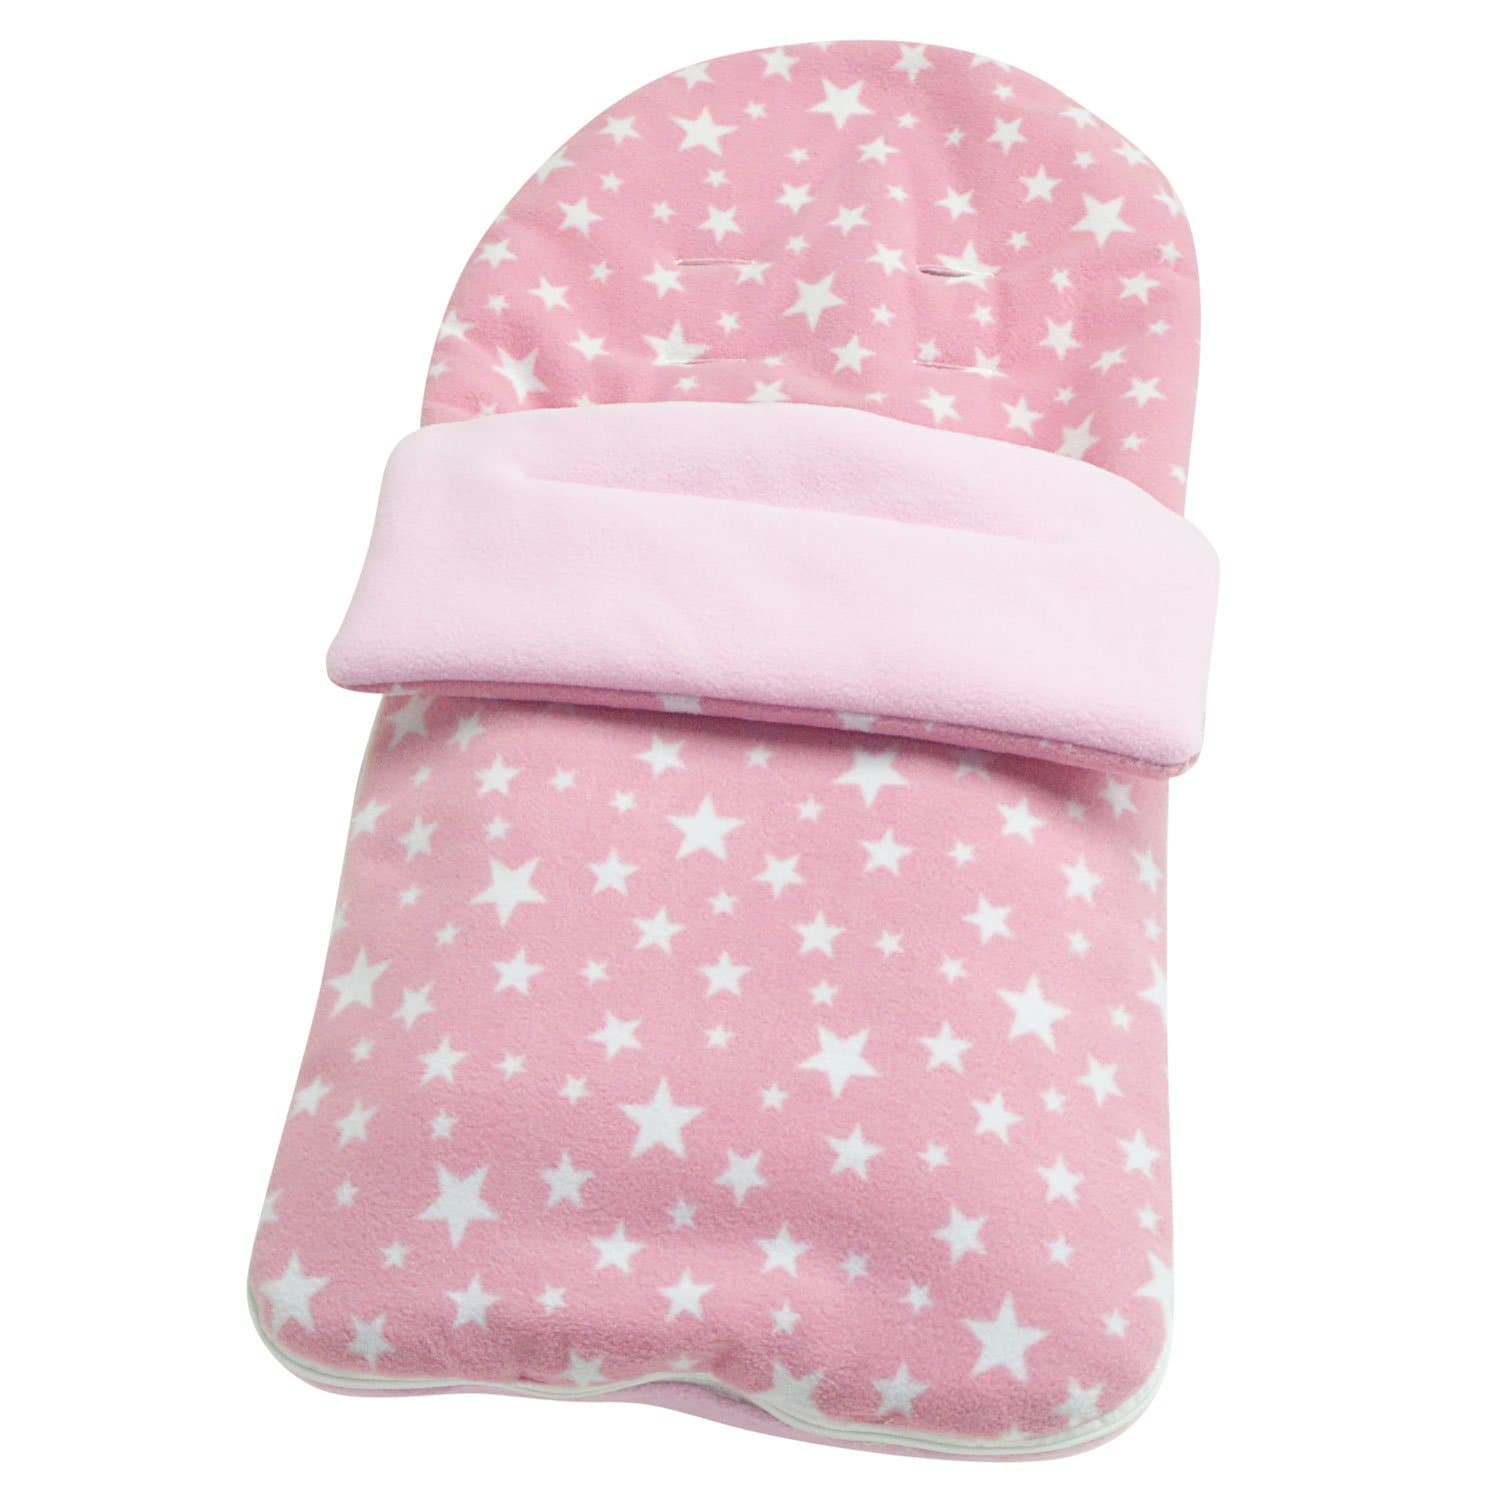 Fleece Footmuff / Cosy Toes Compatible With Easywalker - For Your Little One